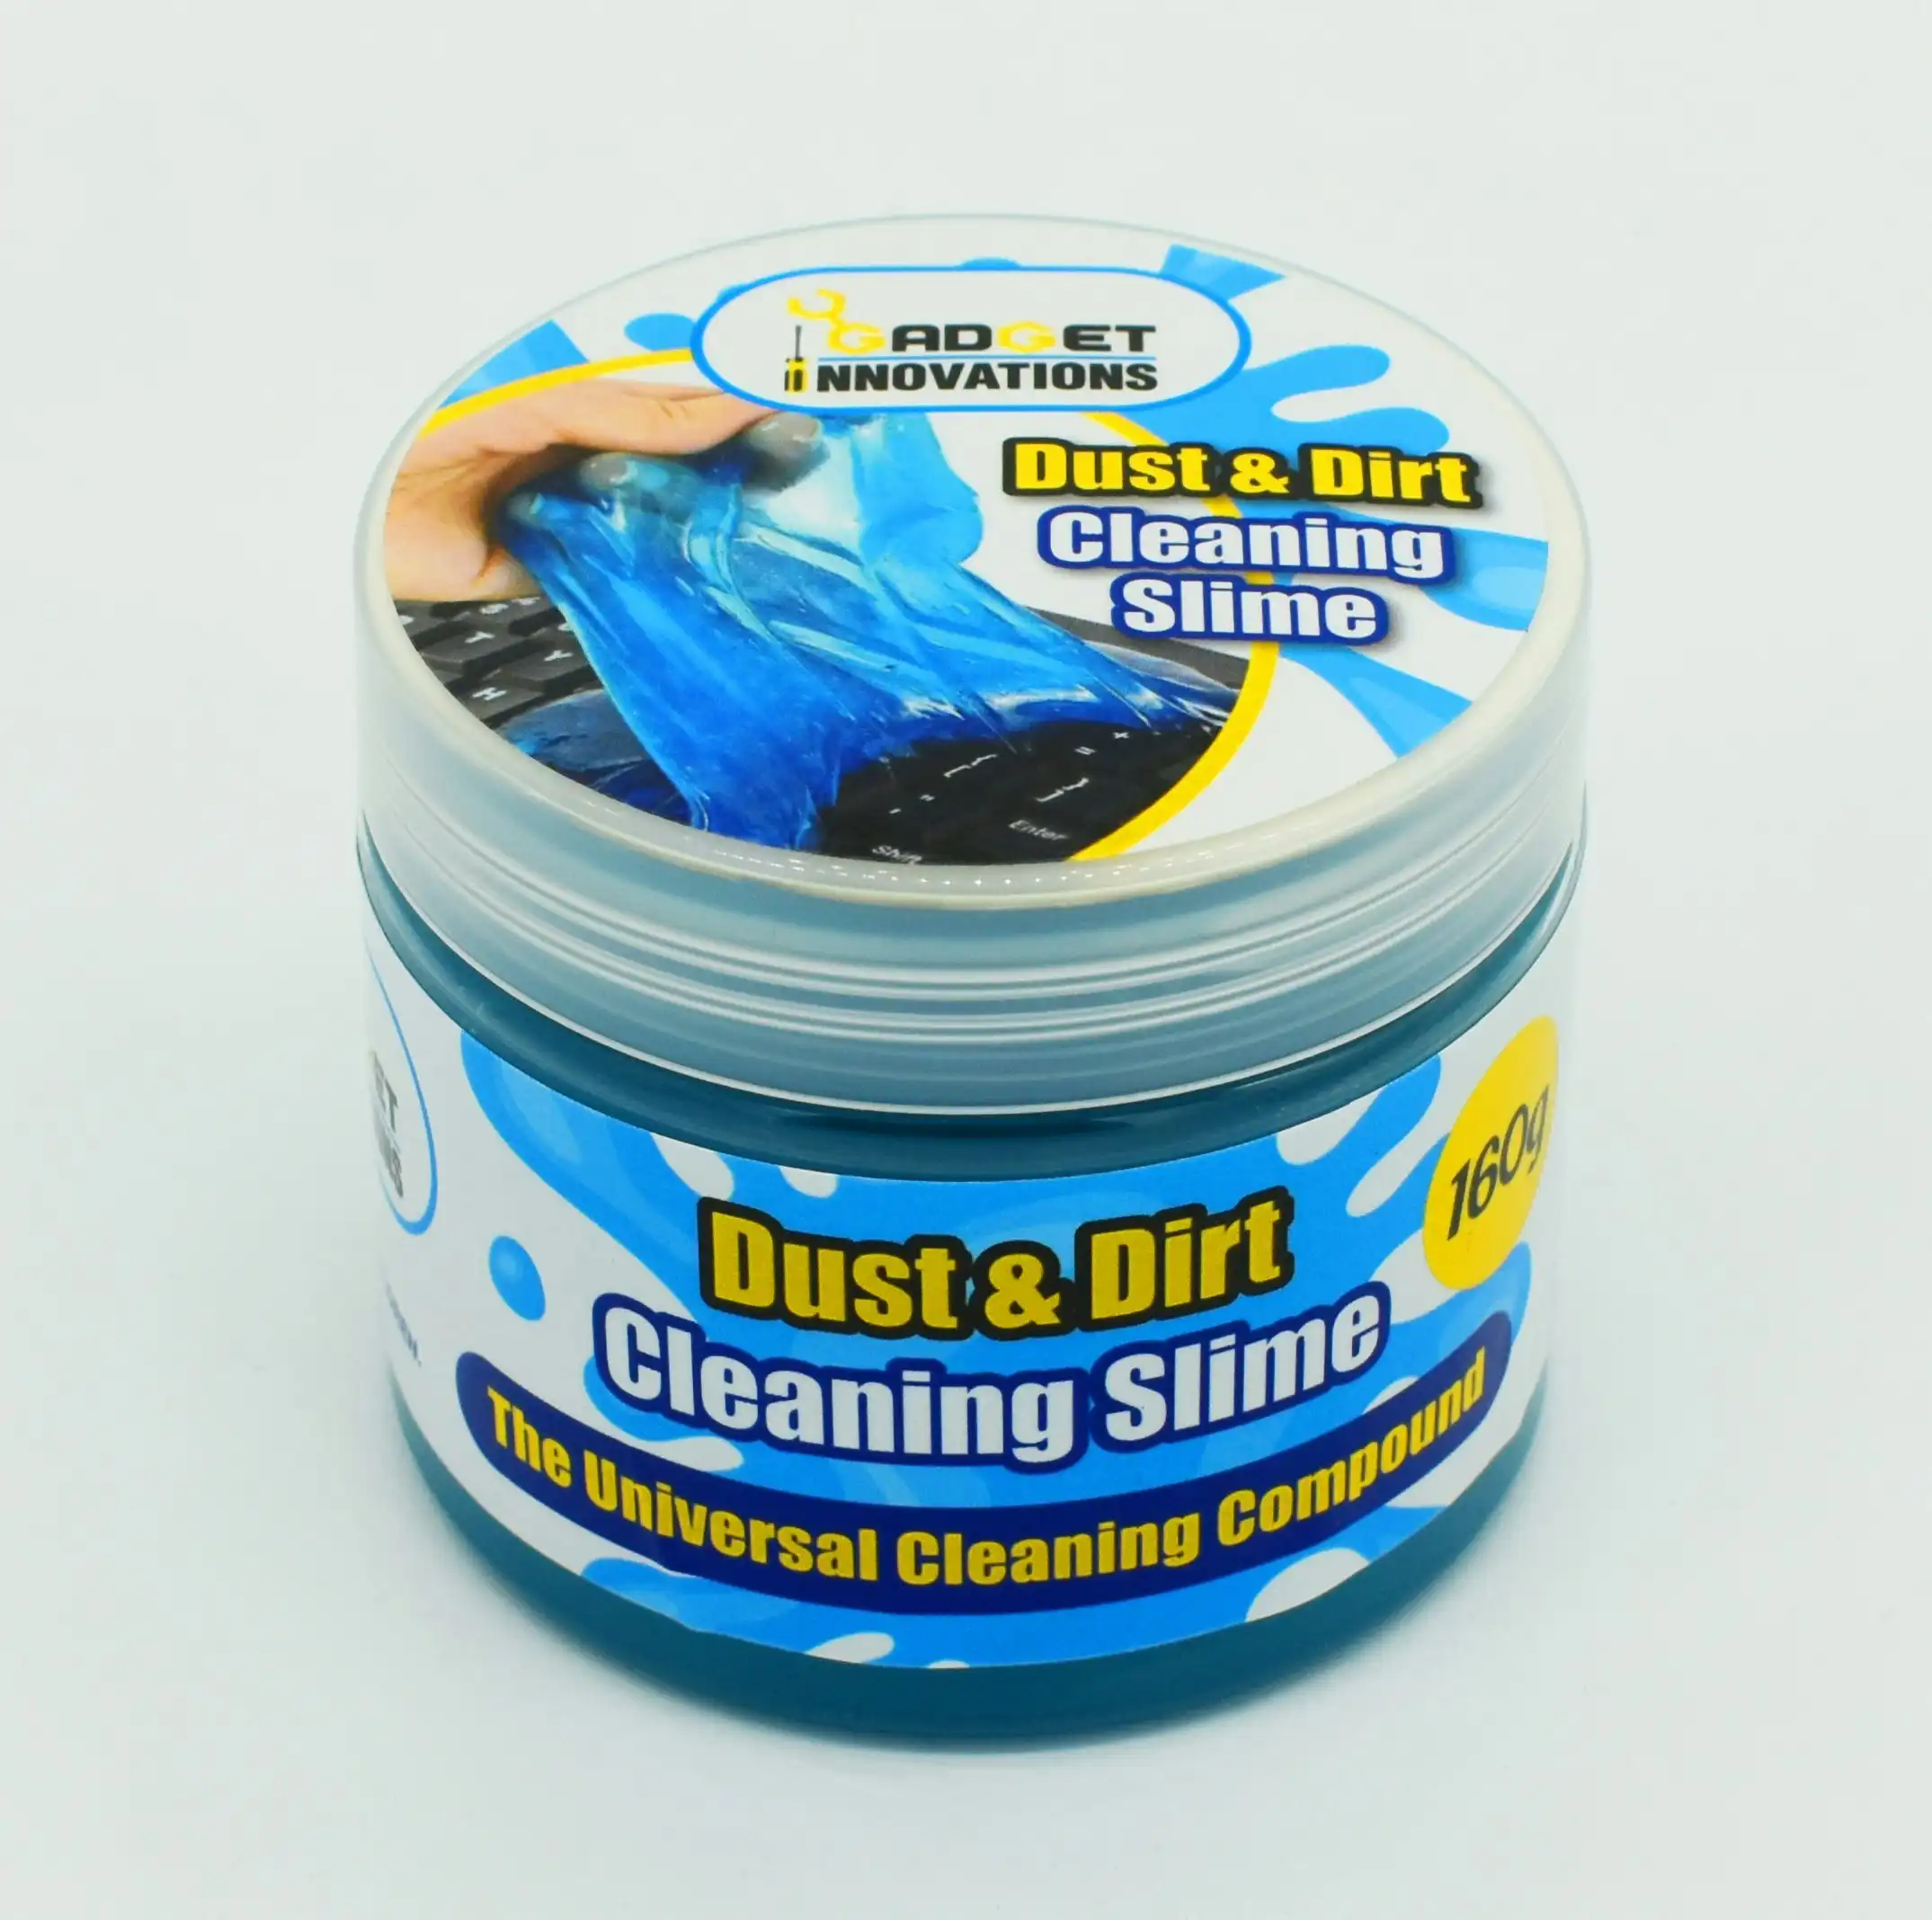 Gadget Innovations Dust & Dirt Cleaning Slime